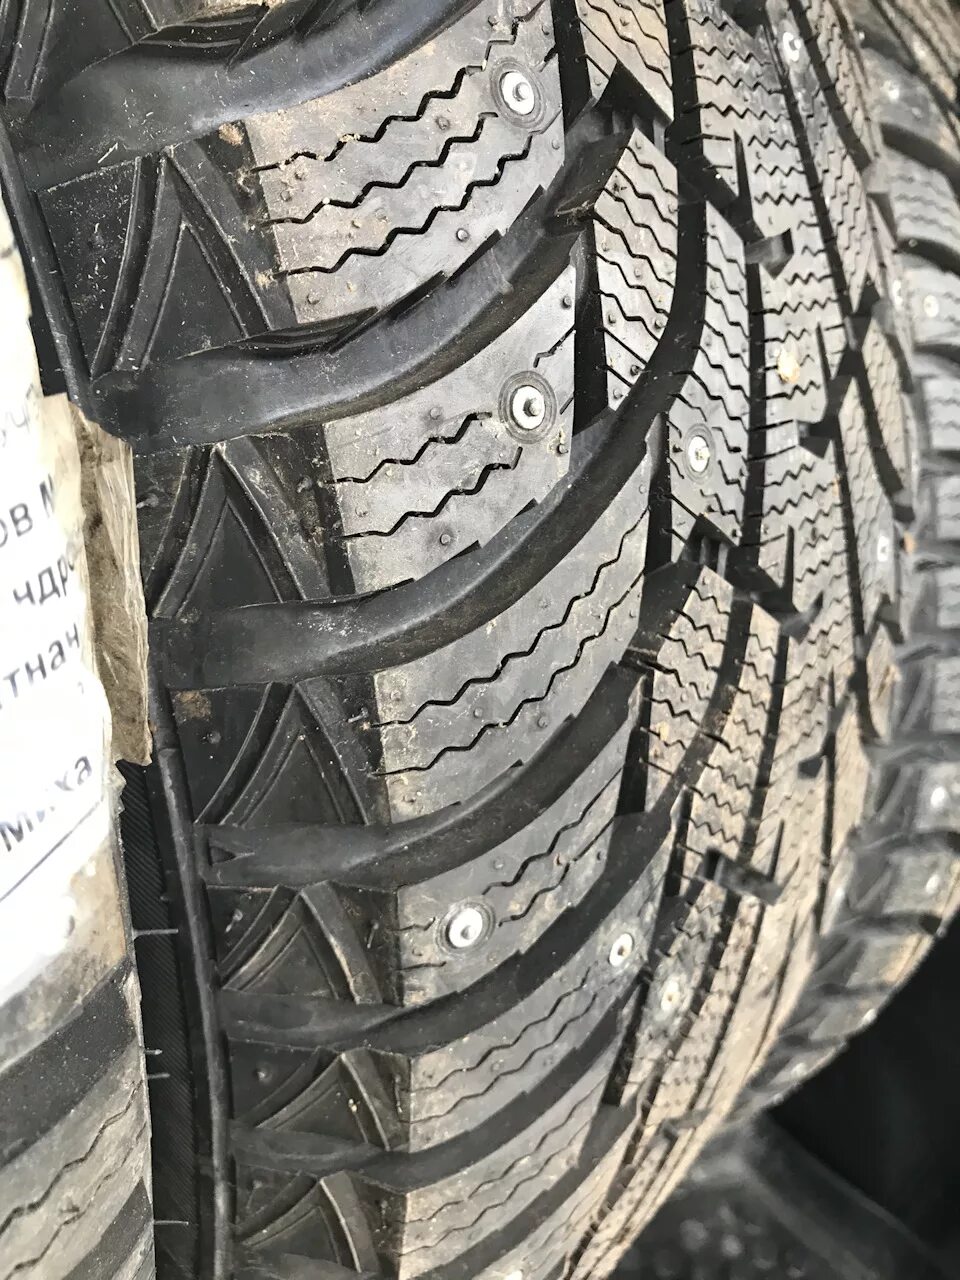 265/65 R17 Maxxis Premitra Ice Nord ns5 116t. Maxxis Premitra Ice Nord ns5. Максис Премитра зима 265 65 17. Maxxis Premitra Ice 5.